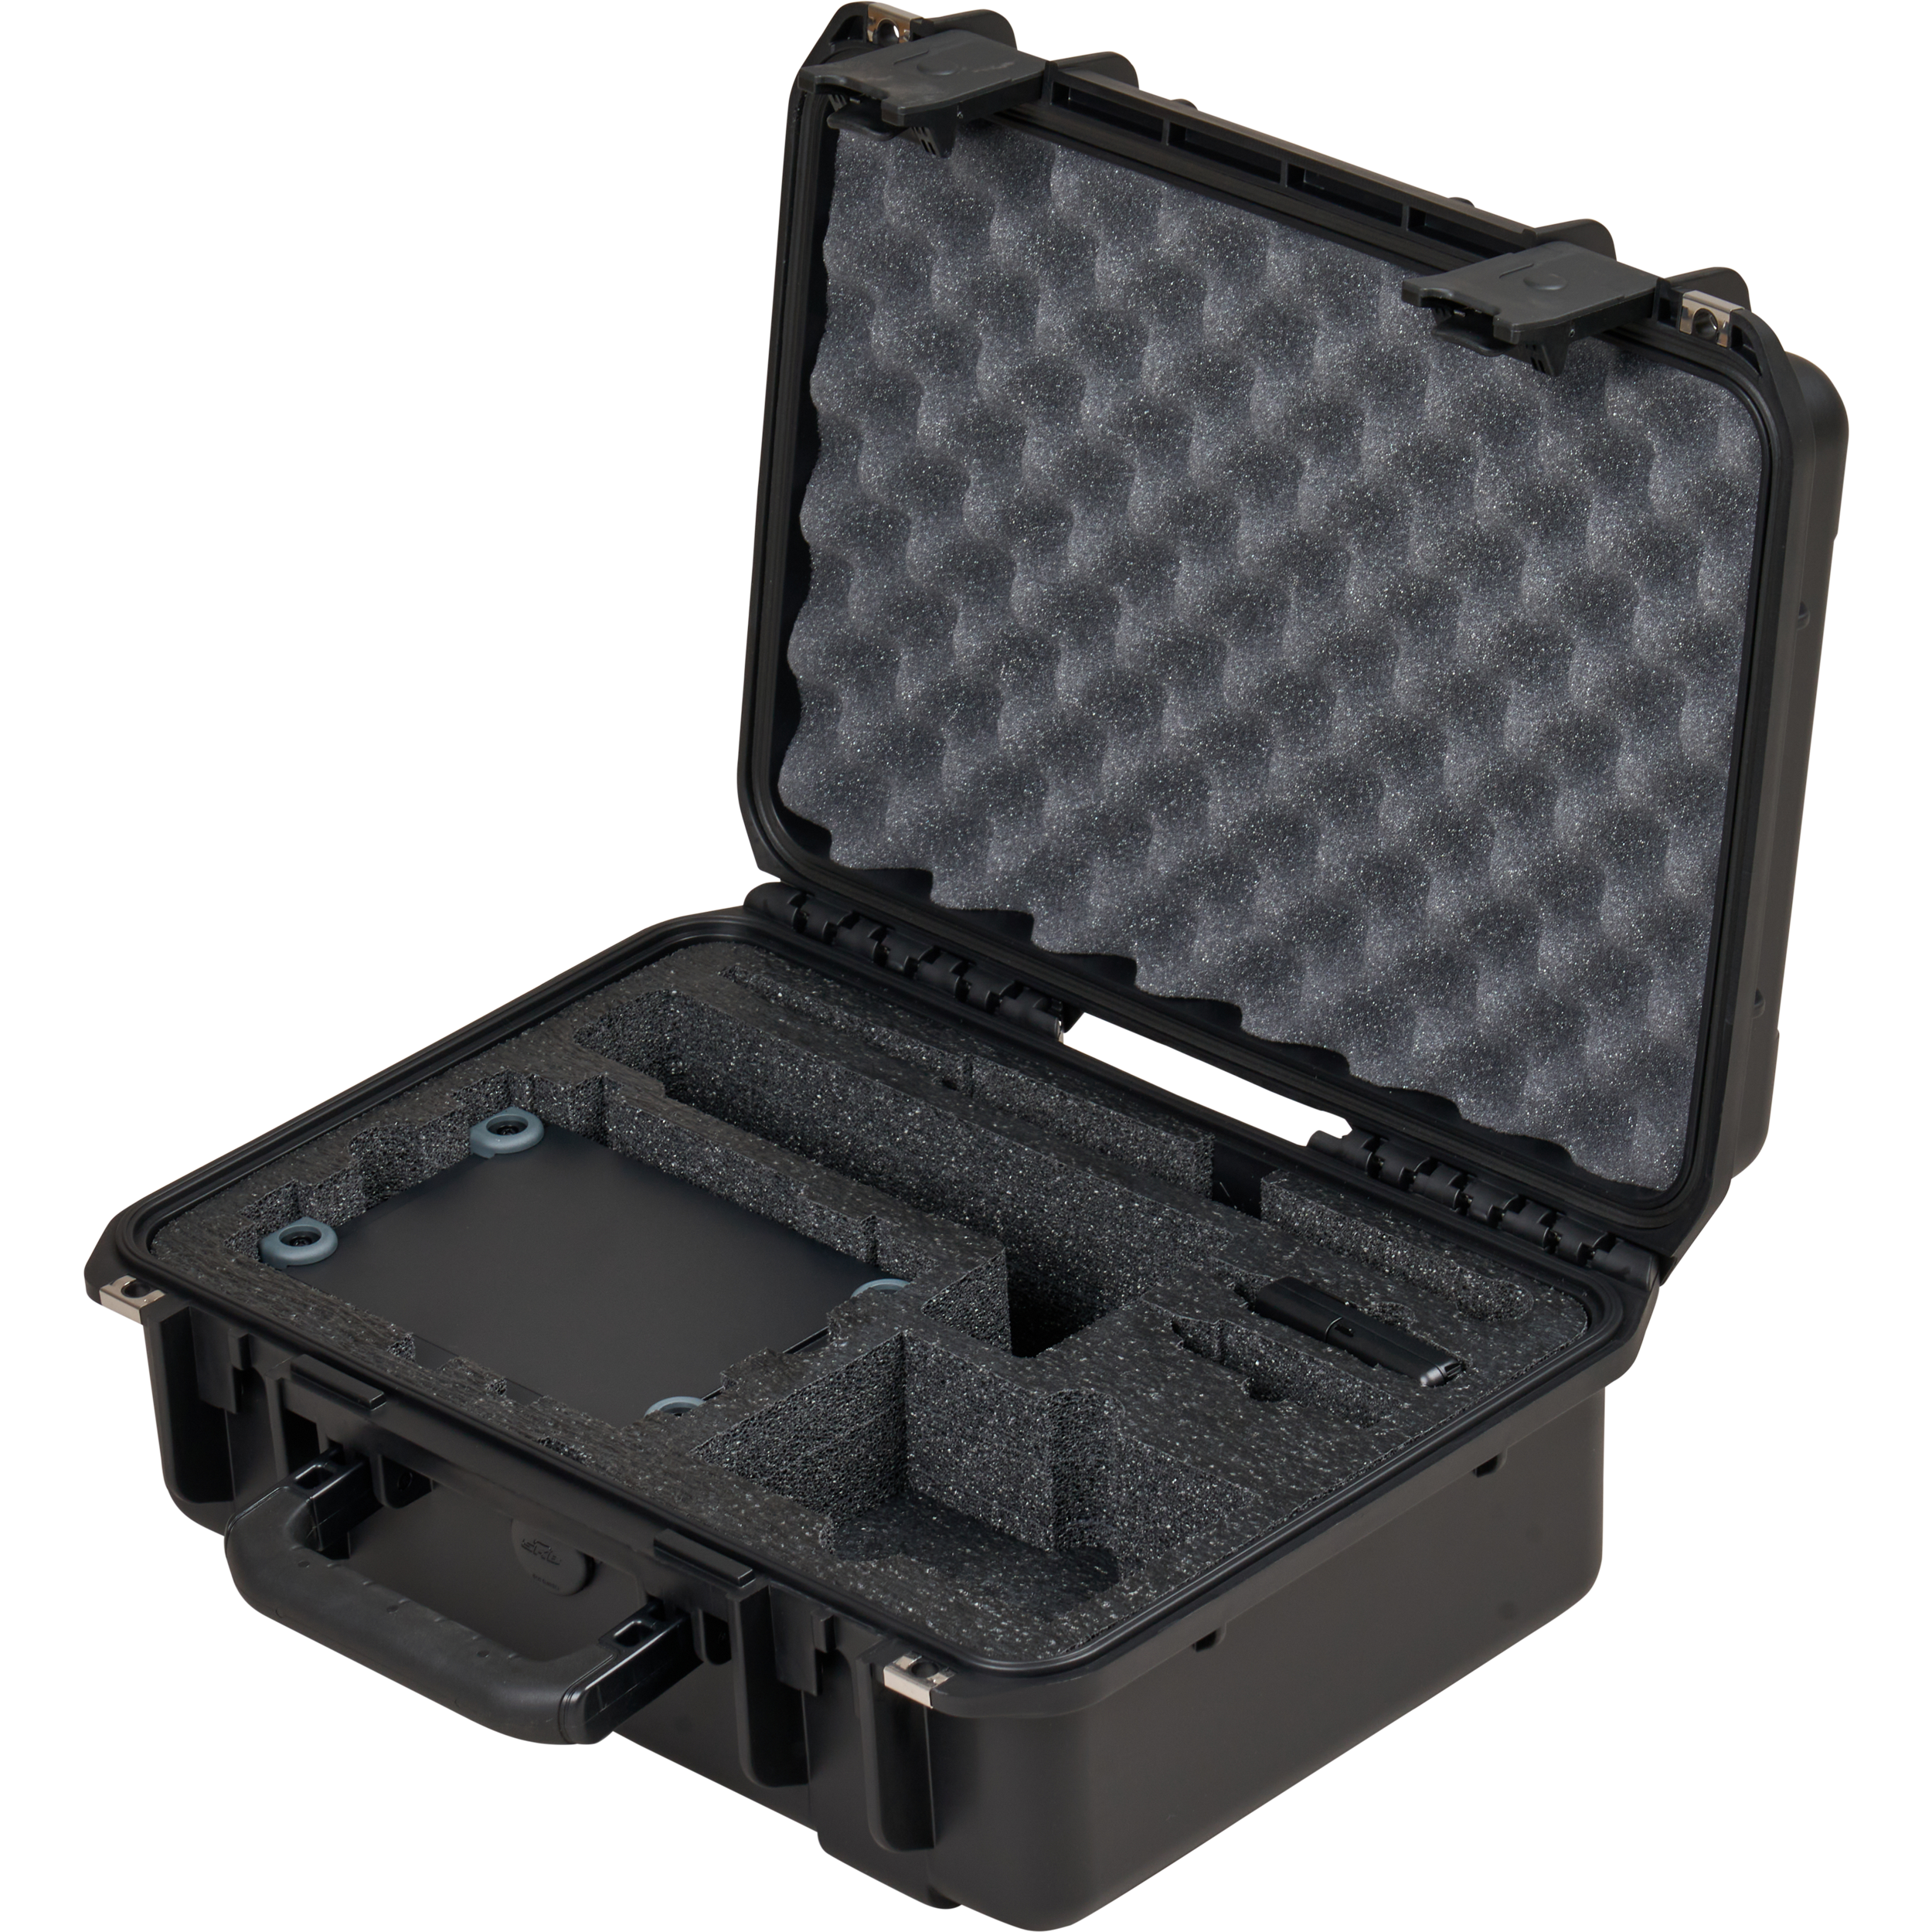 BYFP ipCase for Shure PSM900